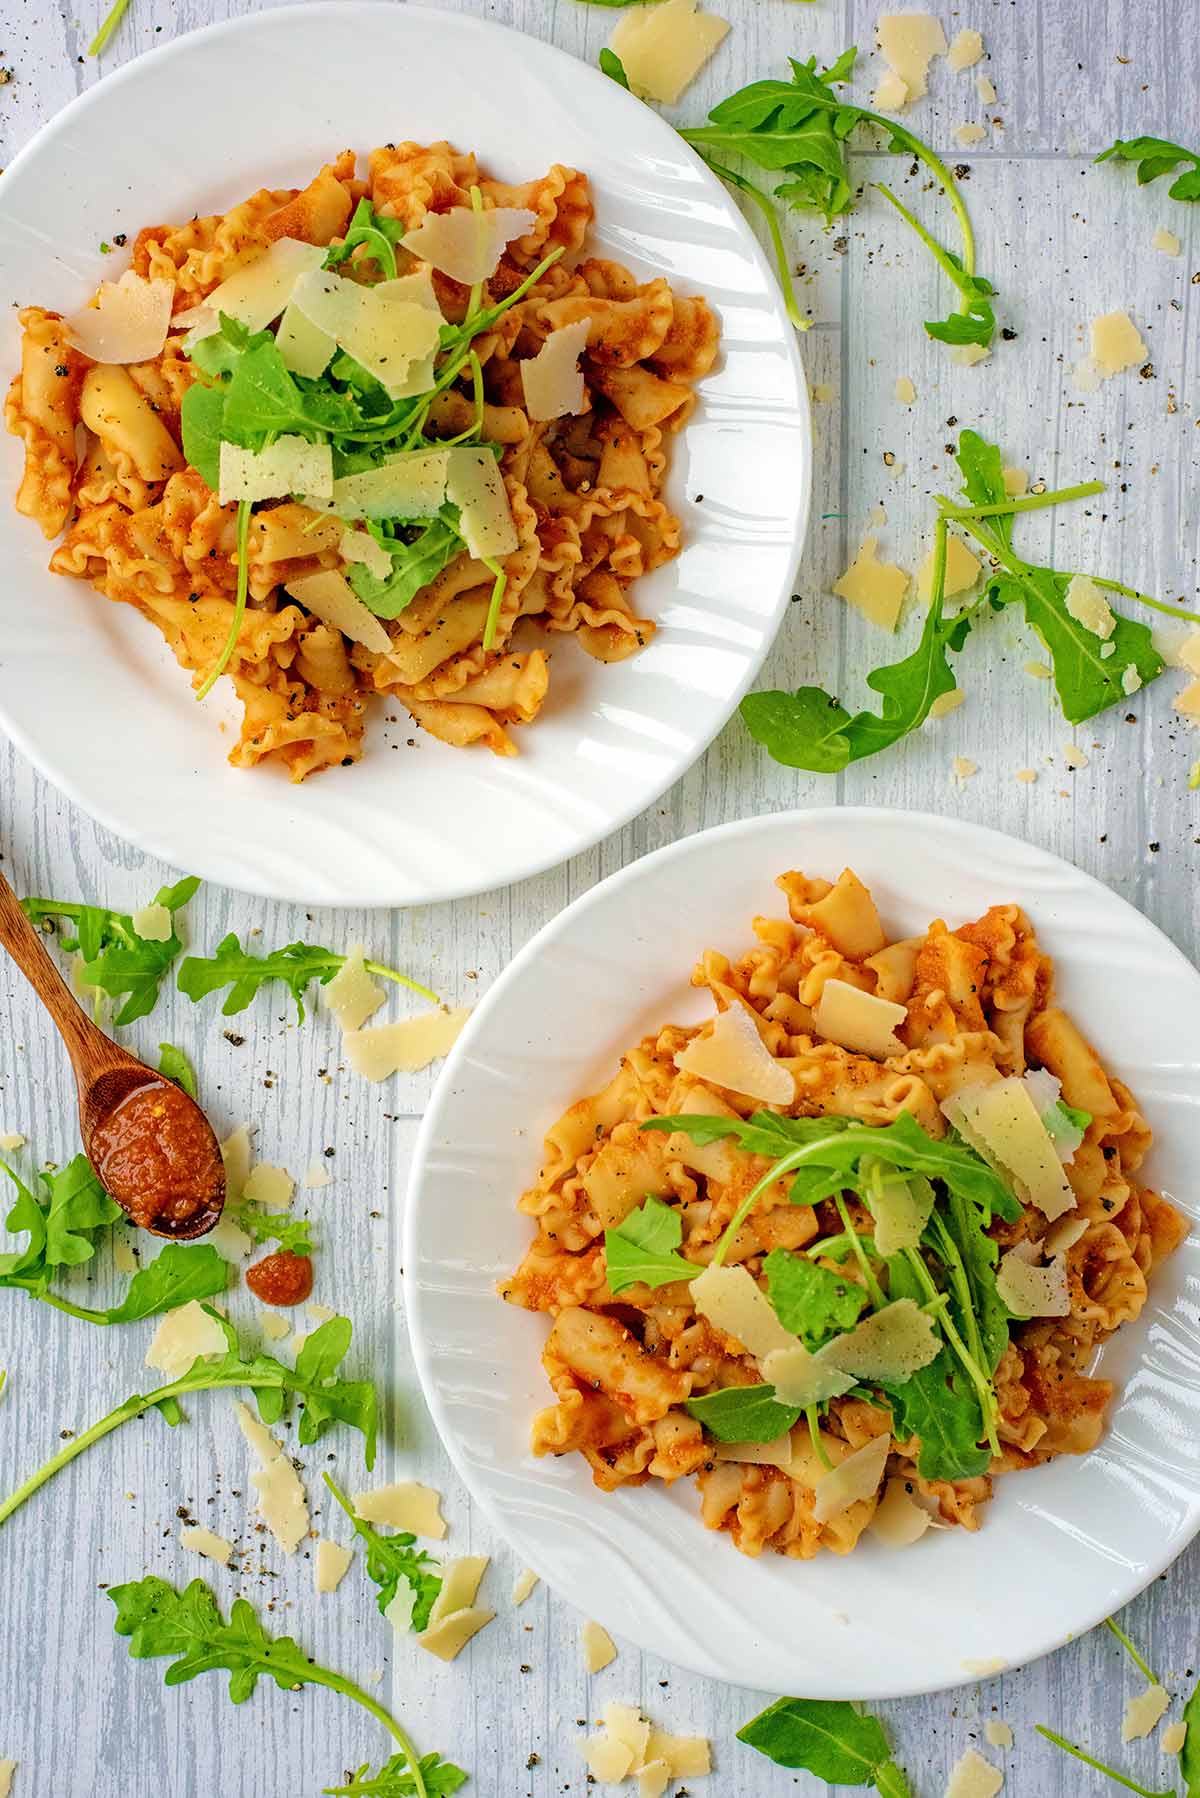 Two bowls of pasta in slow cooker pasta sauce.